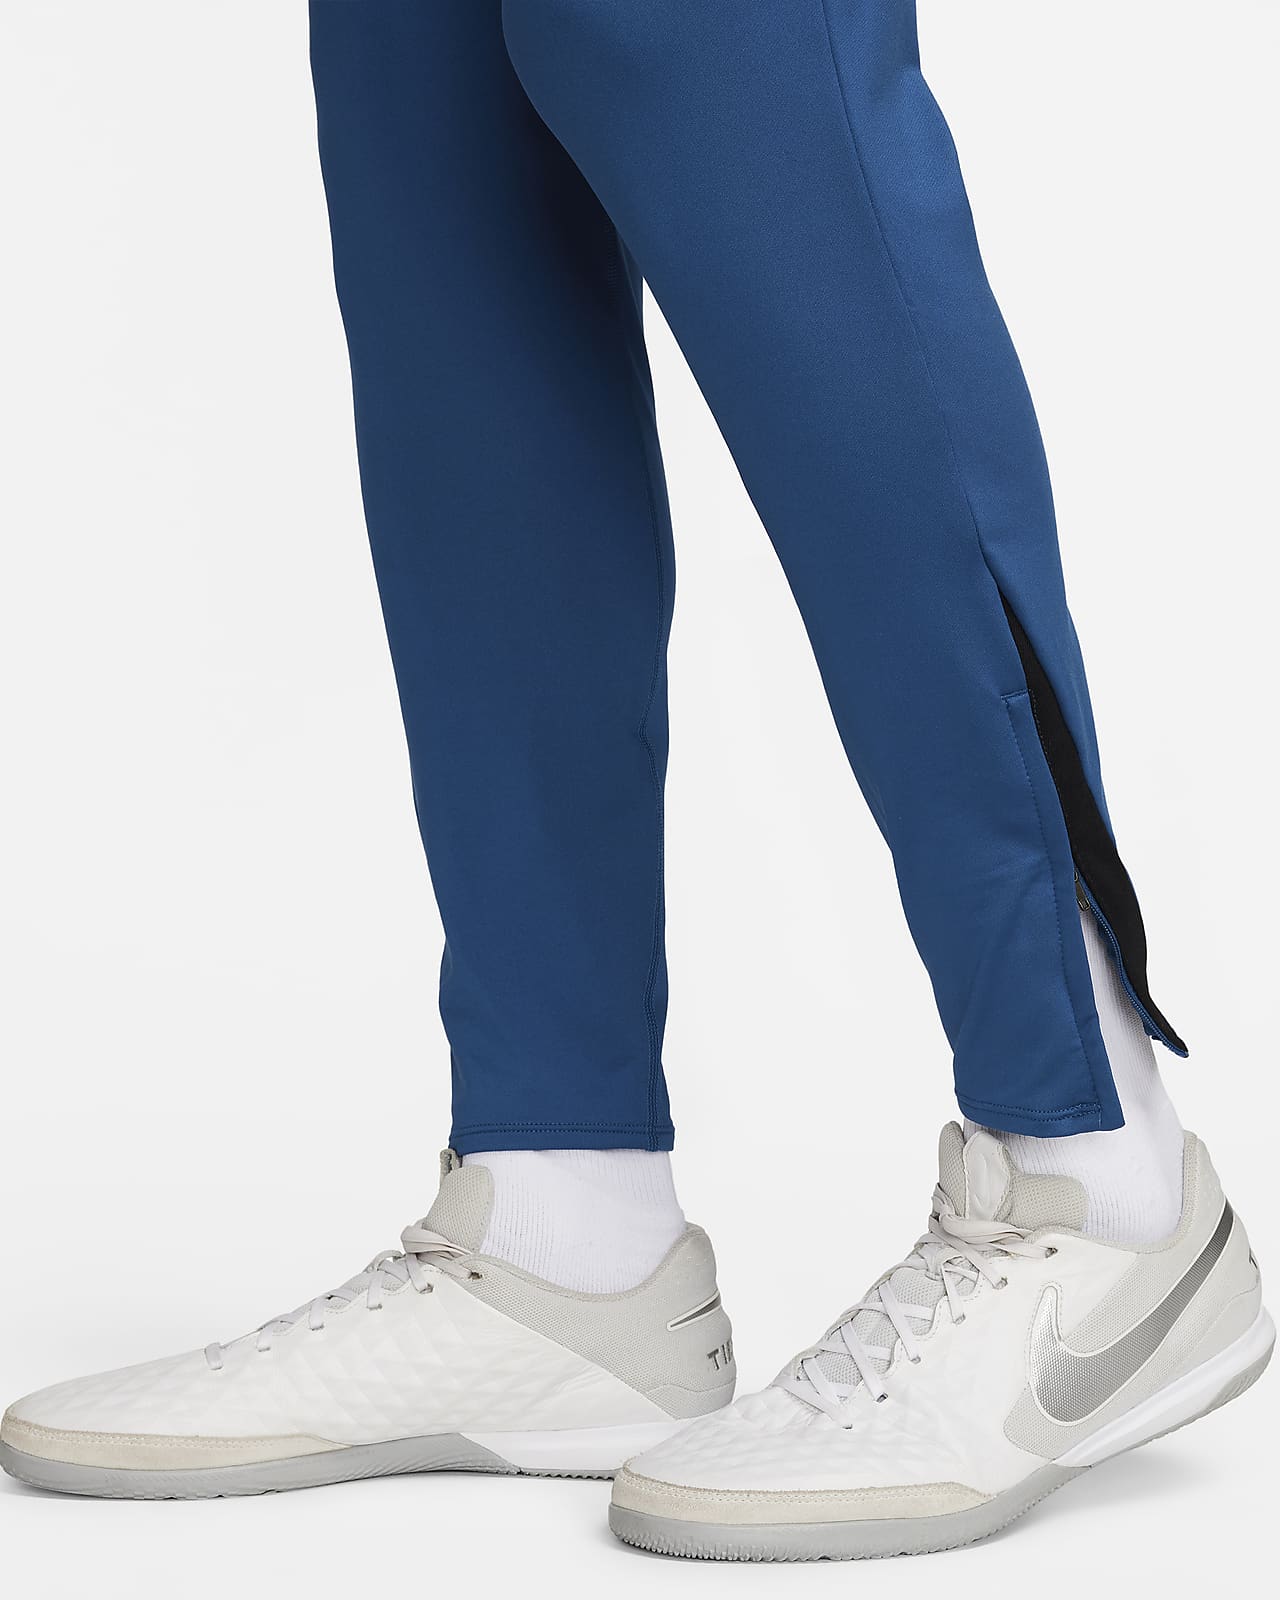  Nike Dri-FIT Strike Women's Soccer Pants, Mystic Navy, Small :  Clothing, Shoes & Jewelry